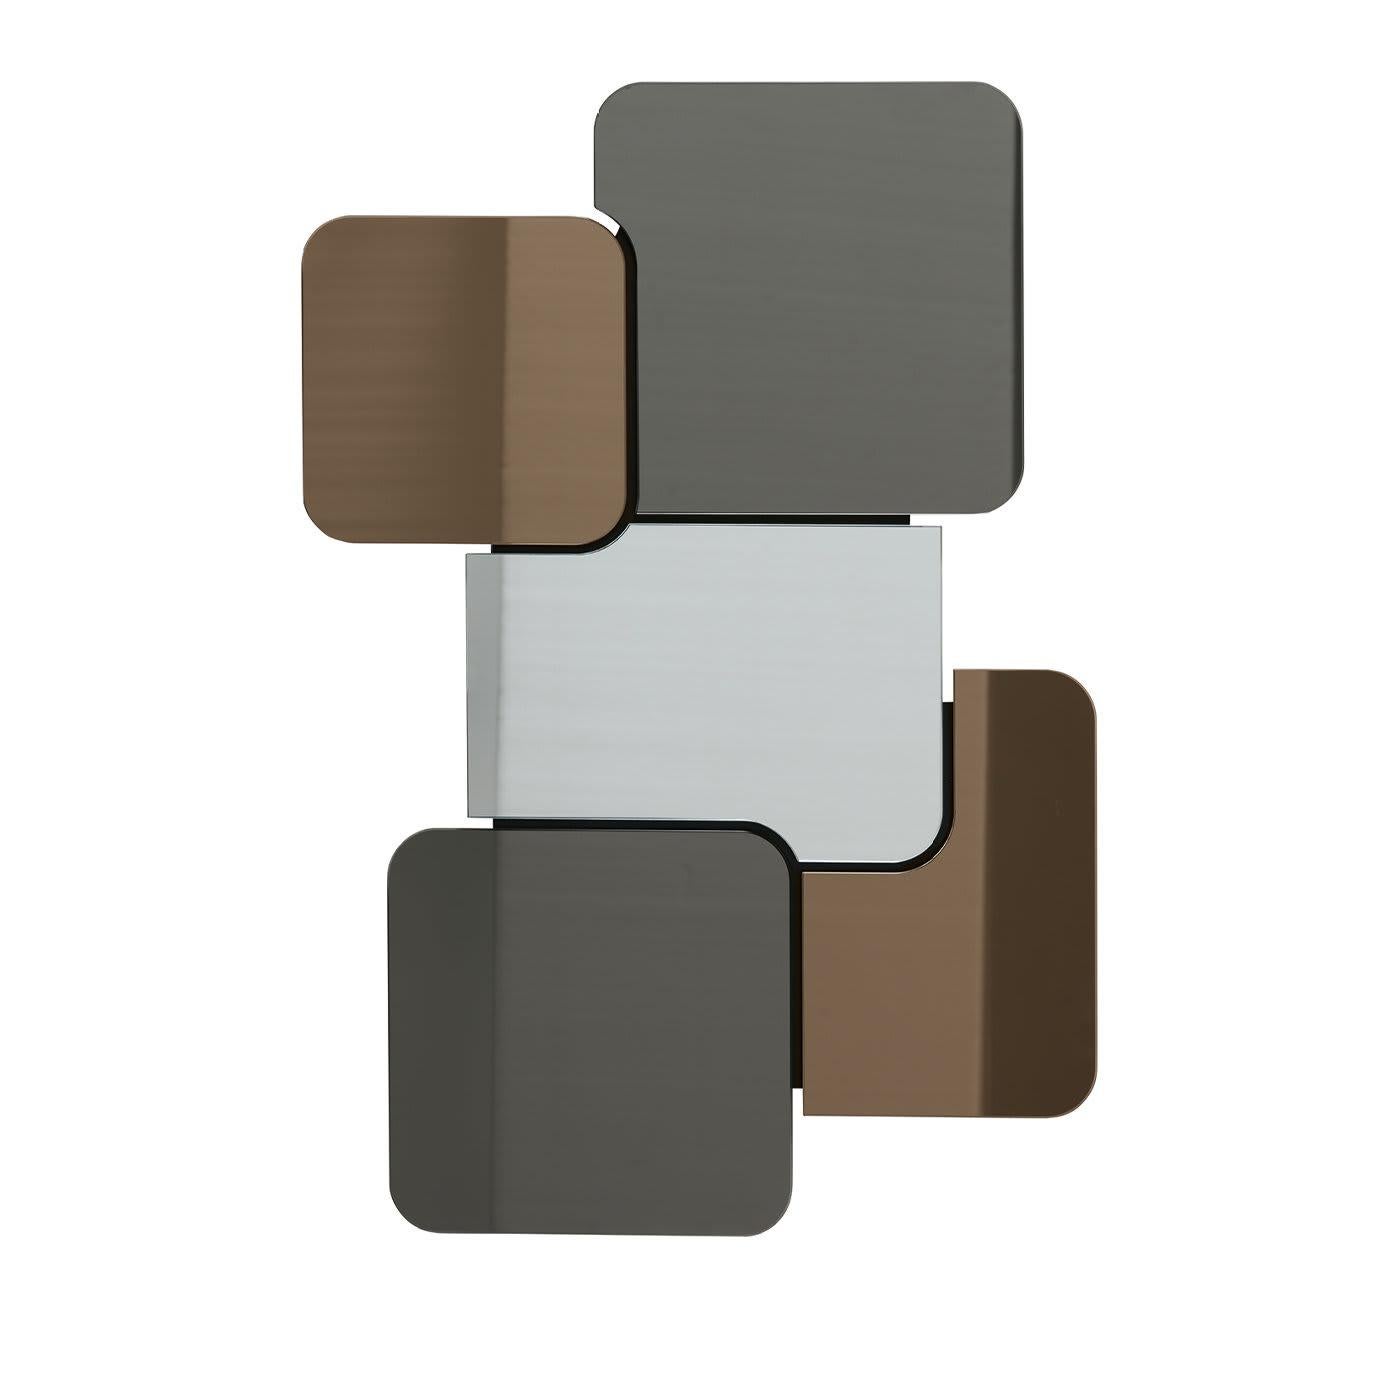 A chic contemporary addition to an entryway or hall, the Domino Wall Mirror can be hung either vertically or horizontally. Featuring pieces of glass with rounded corners in shades of bronze, silver and gunsmoke, the mirror is pure style. Perfect